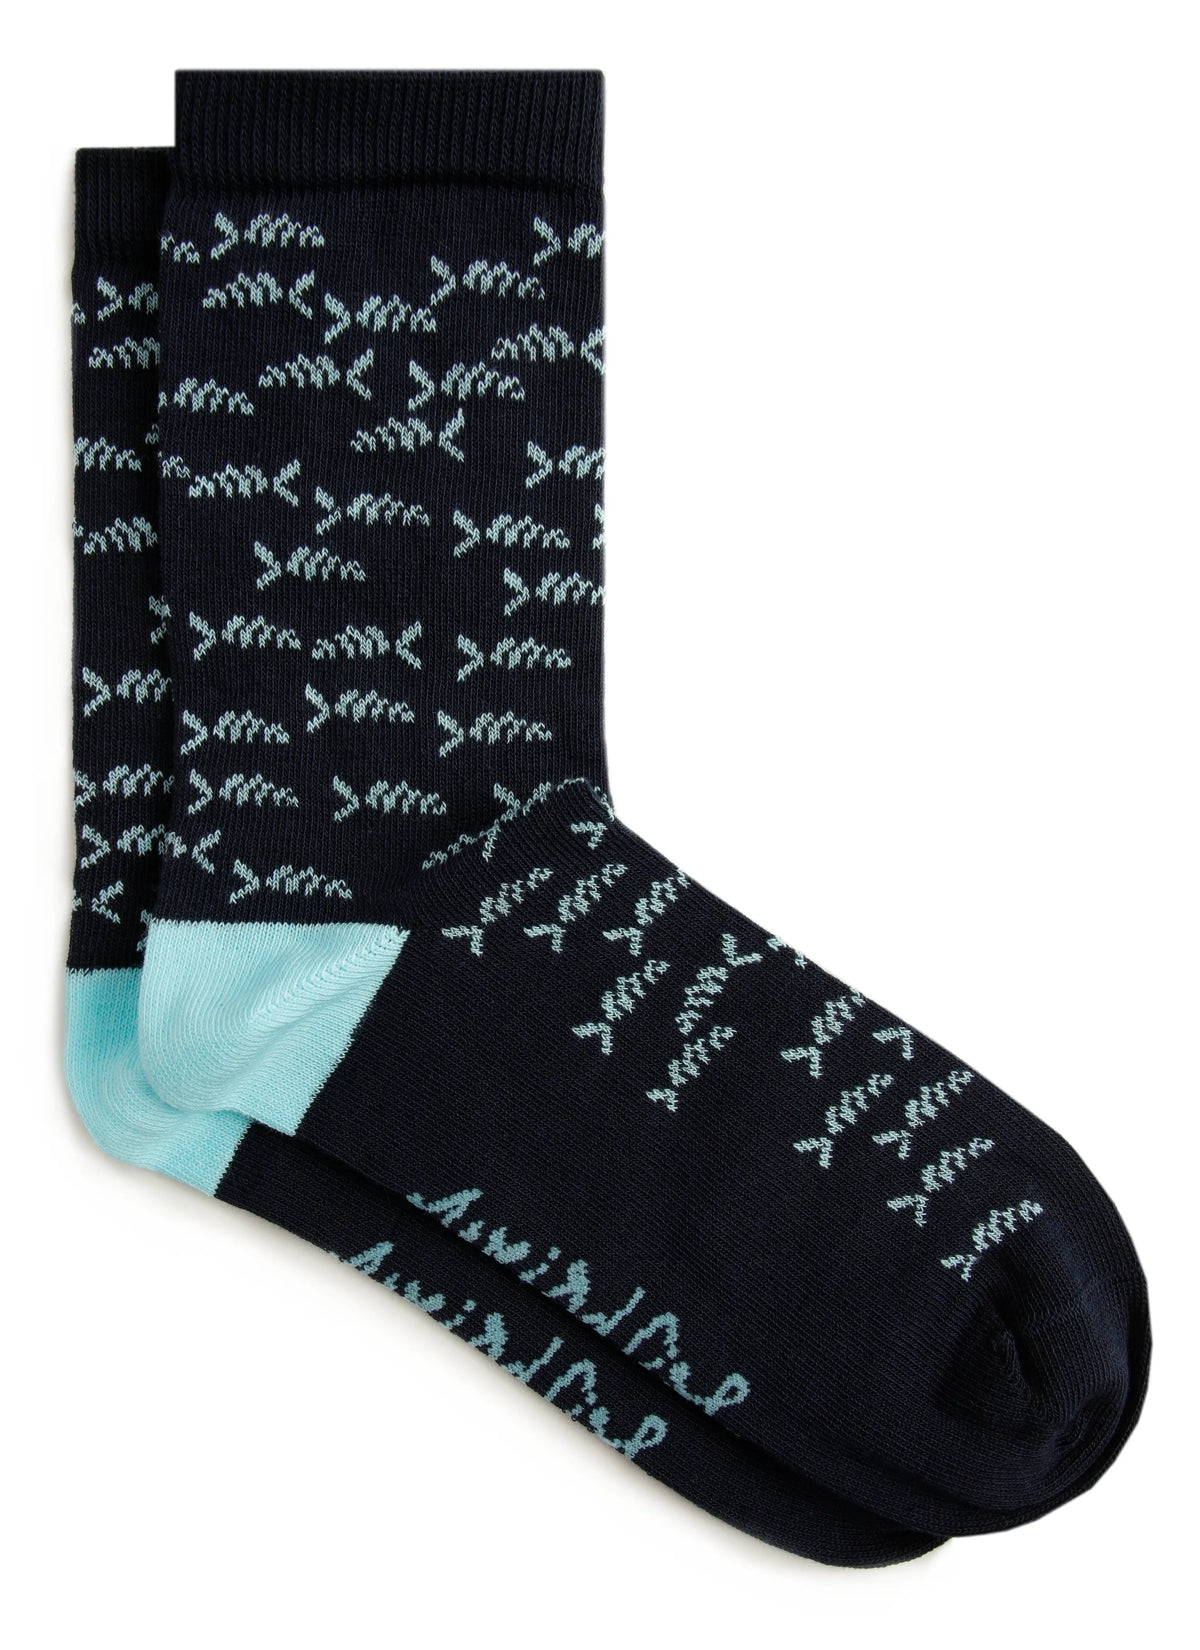 Weird Fish women's Parade cotton blend socks with fish pattern.